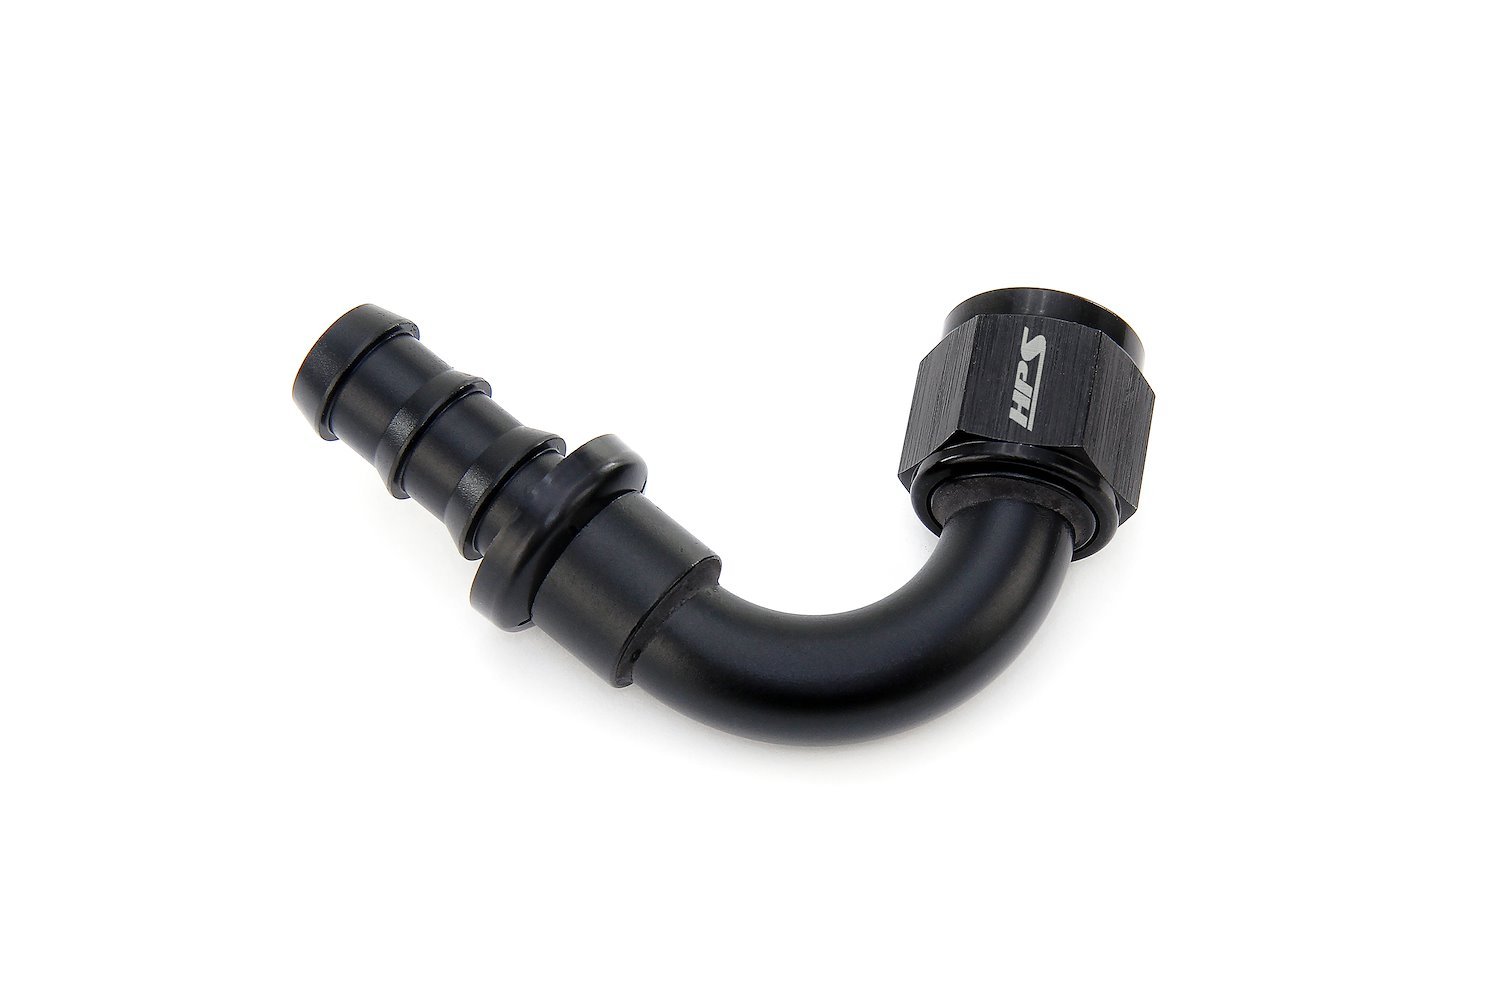 150-1510 150 Series 150-Deg Hose End, Tool-Free Assembly Hose Ends, For Push-On Style Hoses, Easy To Use